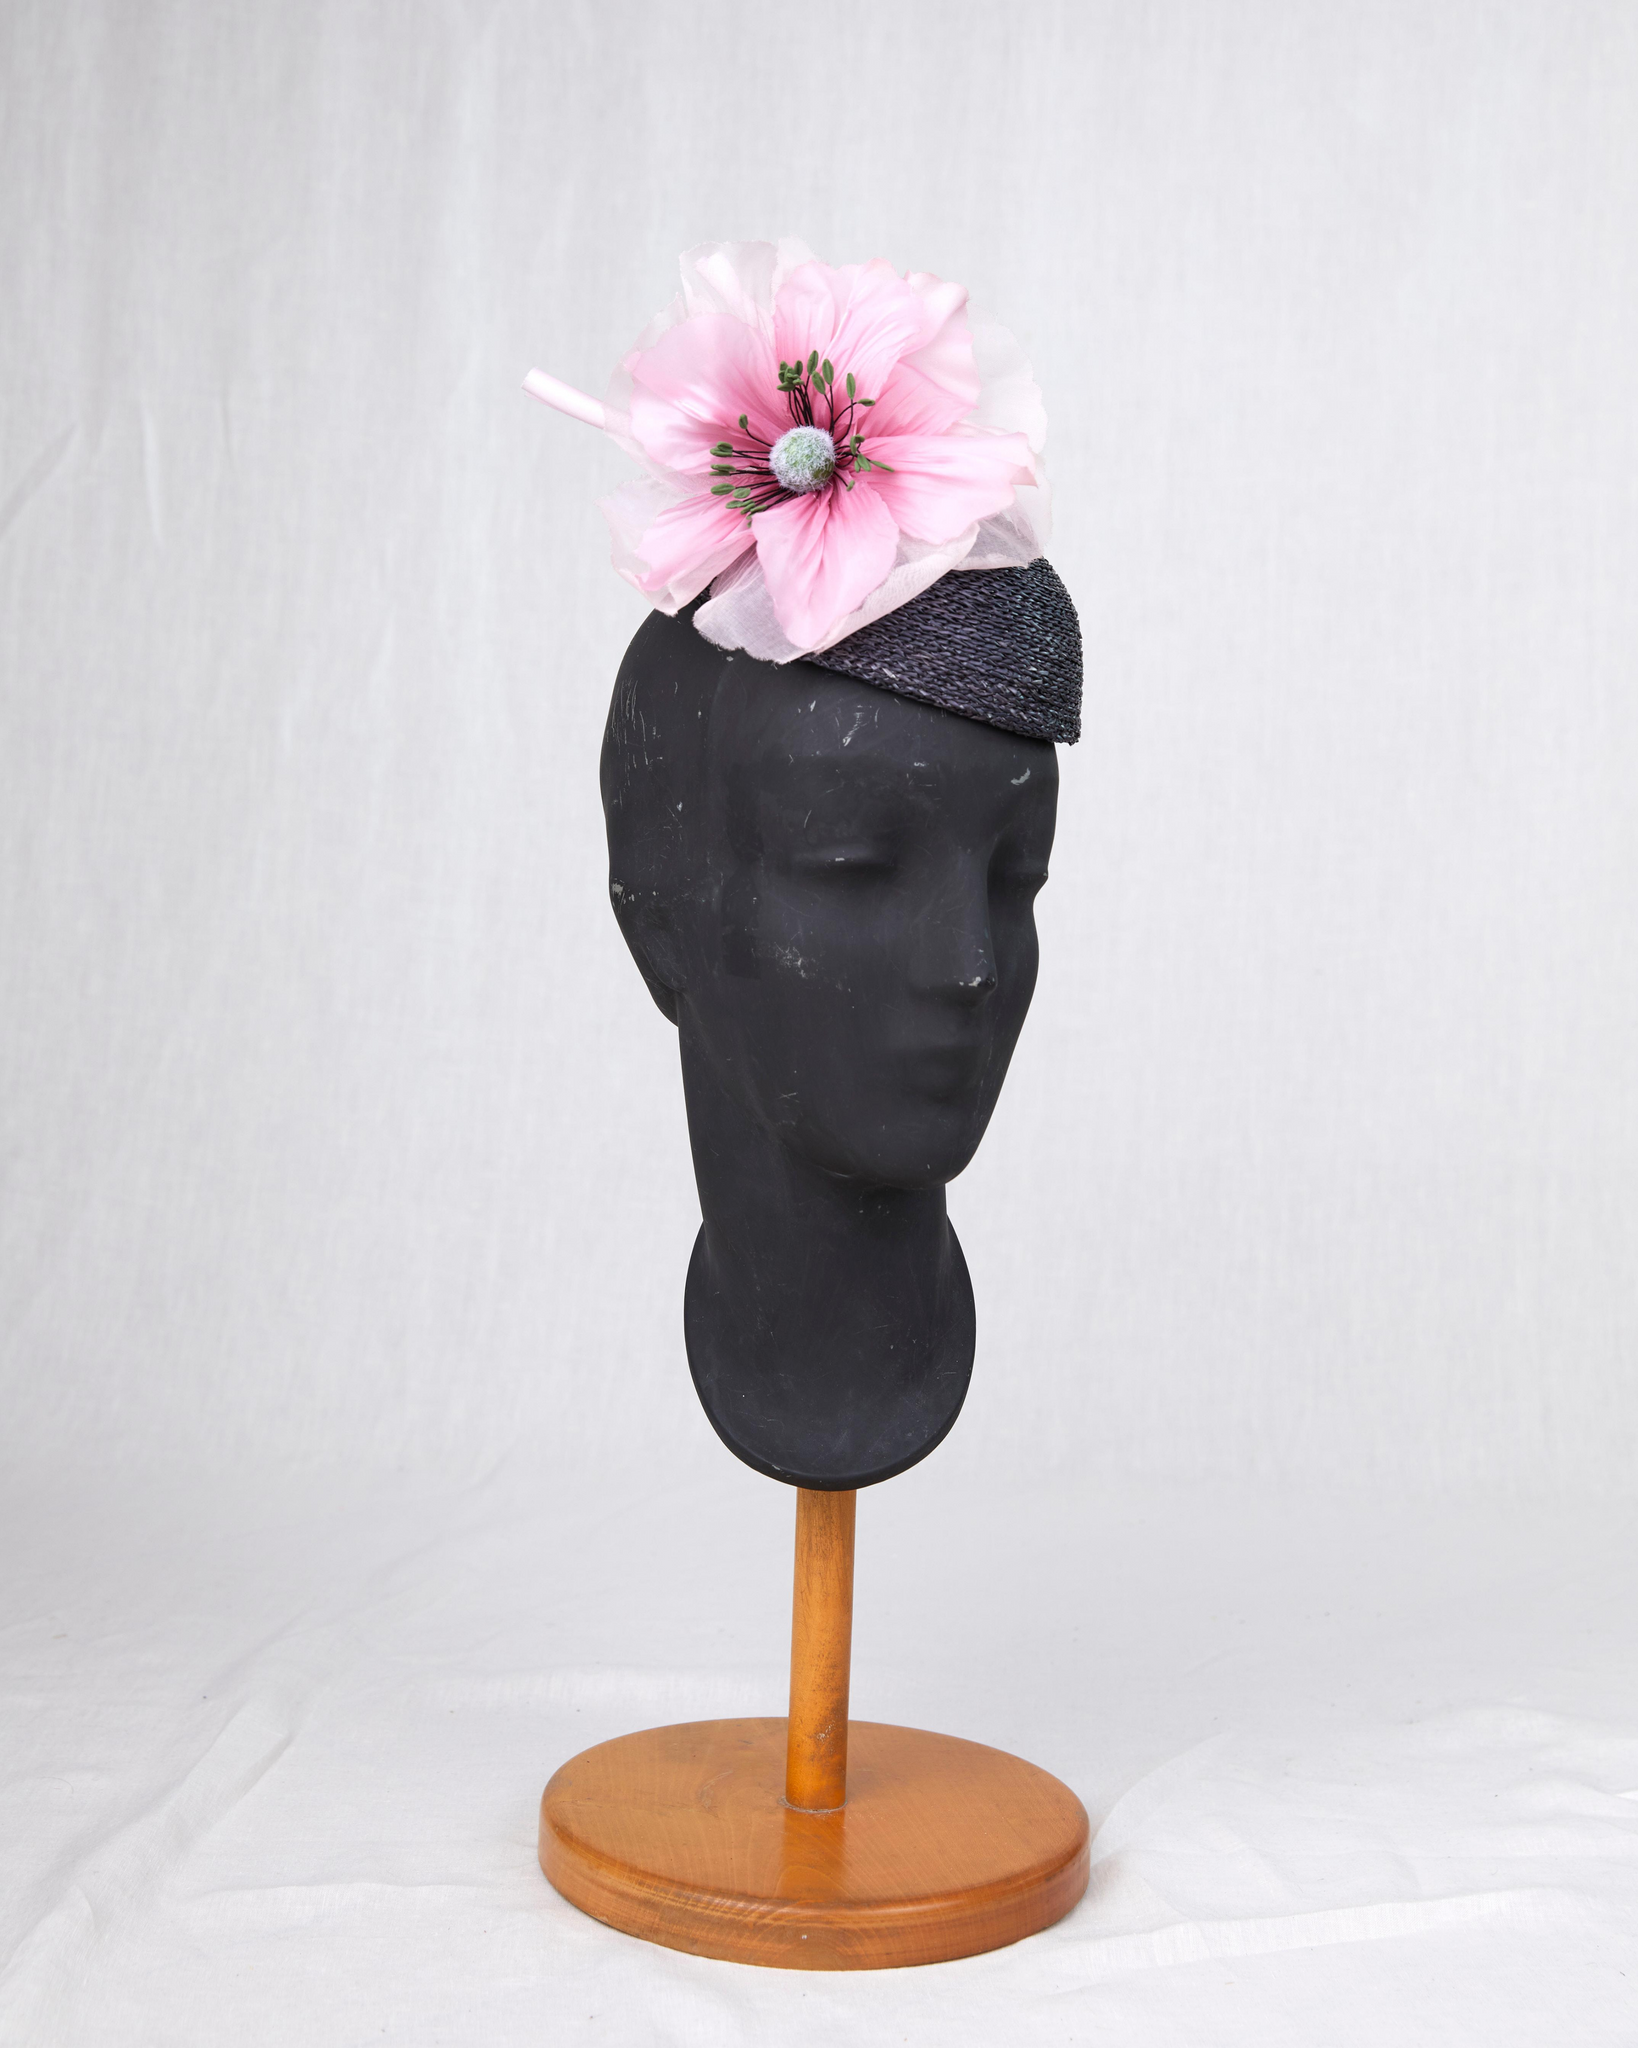 HEADQUARTER | couture headwear Bibi 'Valentina' - headpiece made of rice straw, trimmed with fabric flower. Designed and handcrafted in Switzerland.